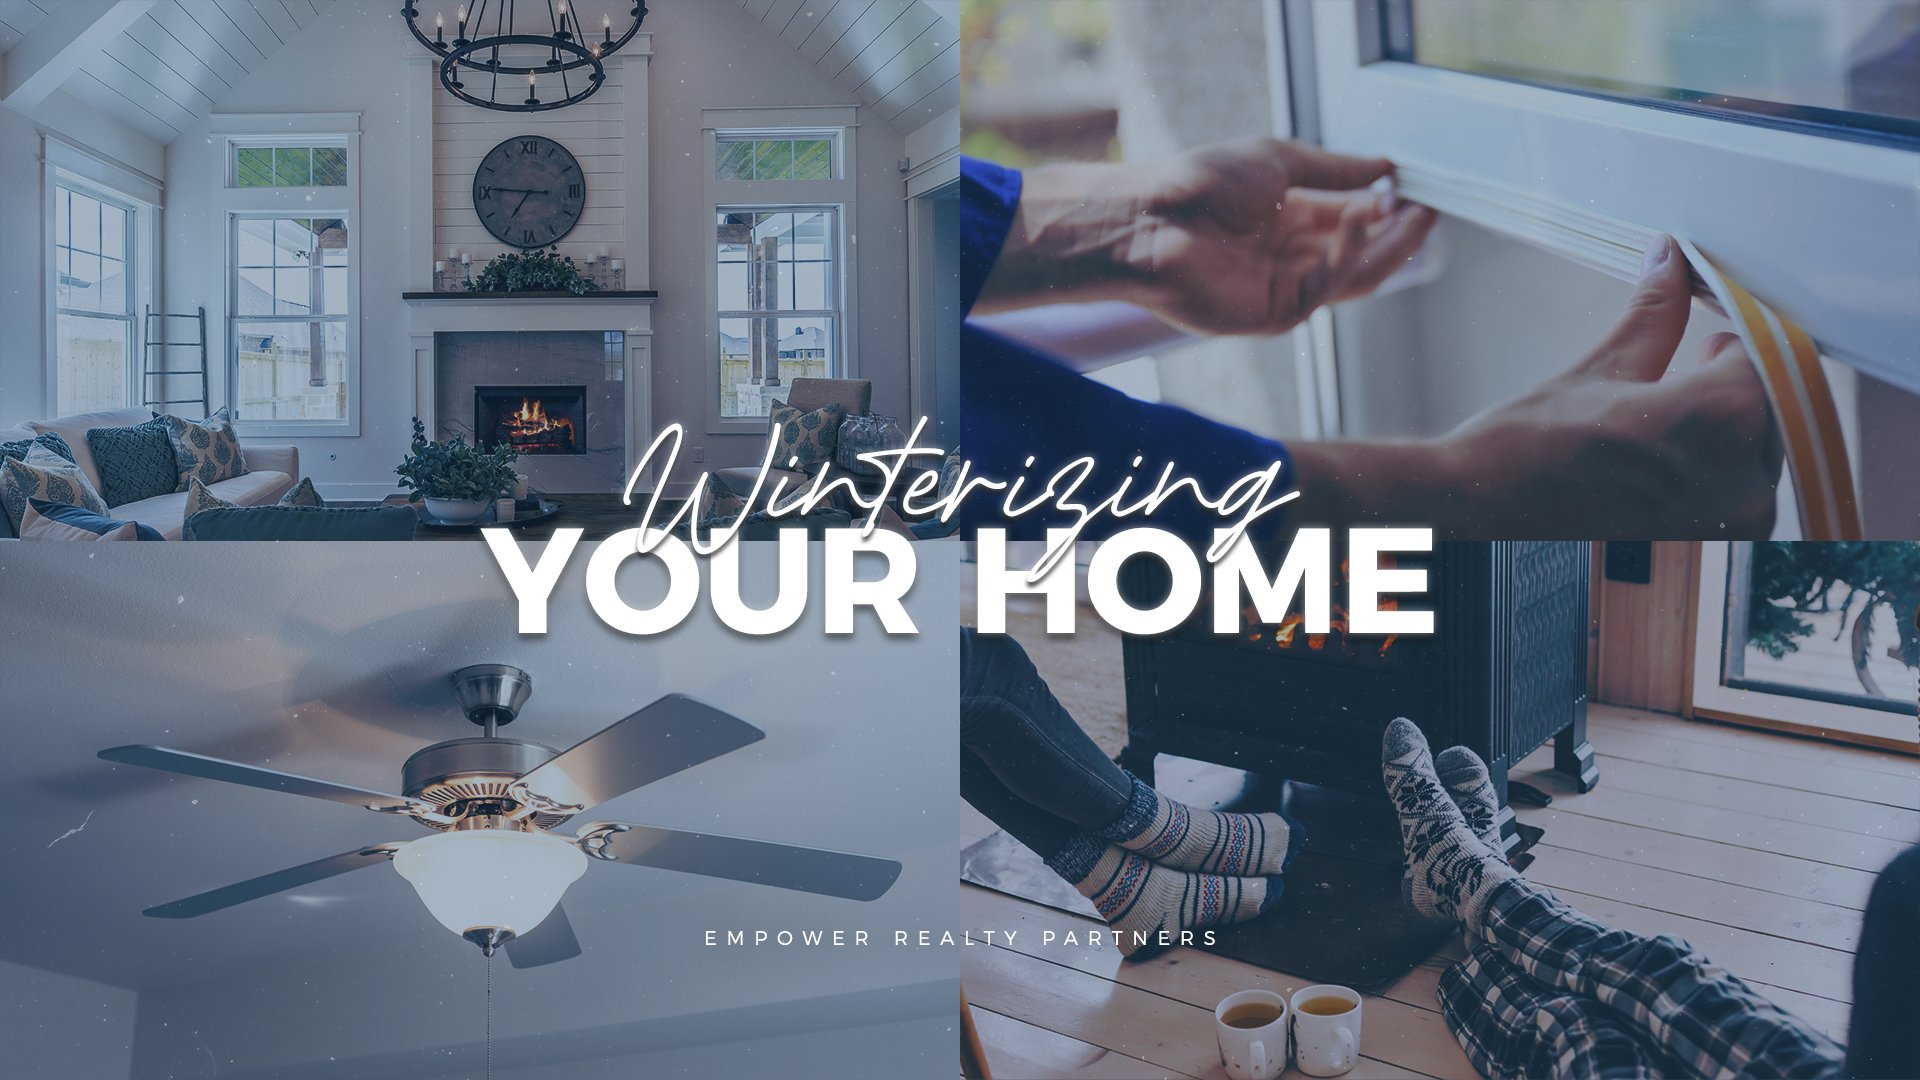 Winterize your home effortlessly with Empower Realty Partners expert guide